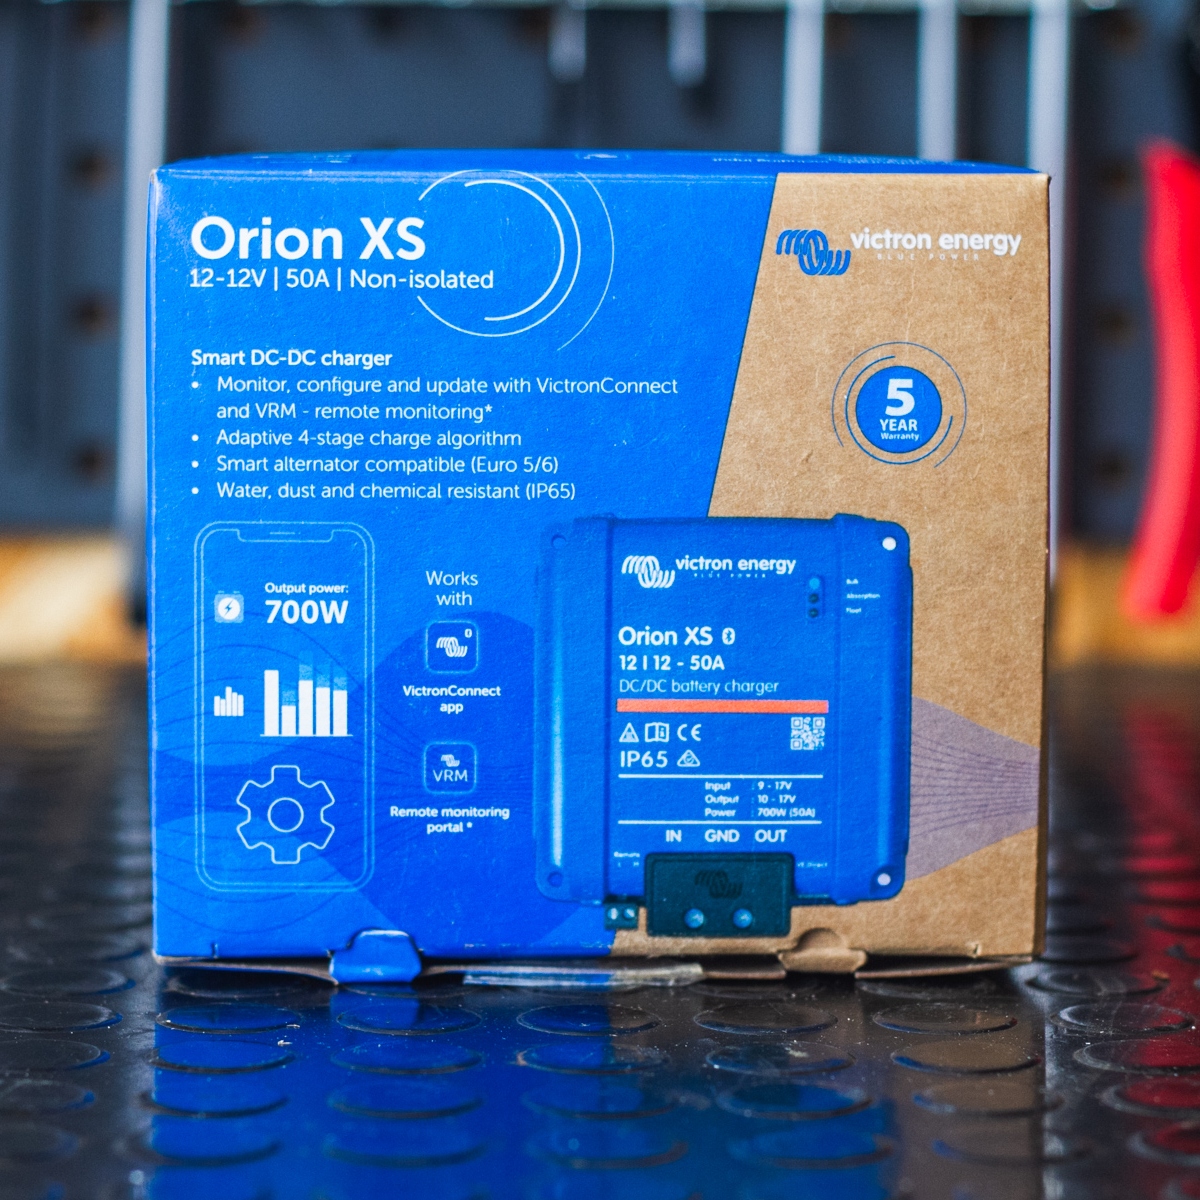 A boxed Orion XS 12/12-50A DC-DC Battery Charger - Victron Non-Isolated Smart BuckBoost is elegantly placed on a reflective dark surface.